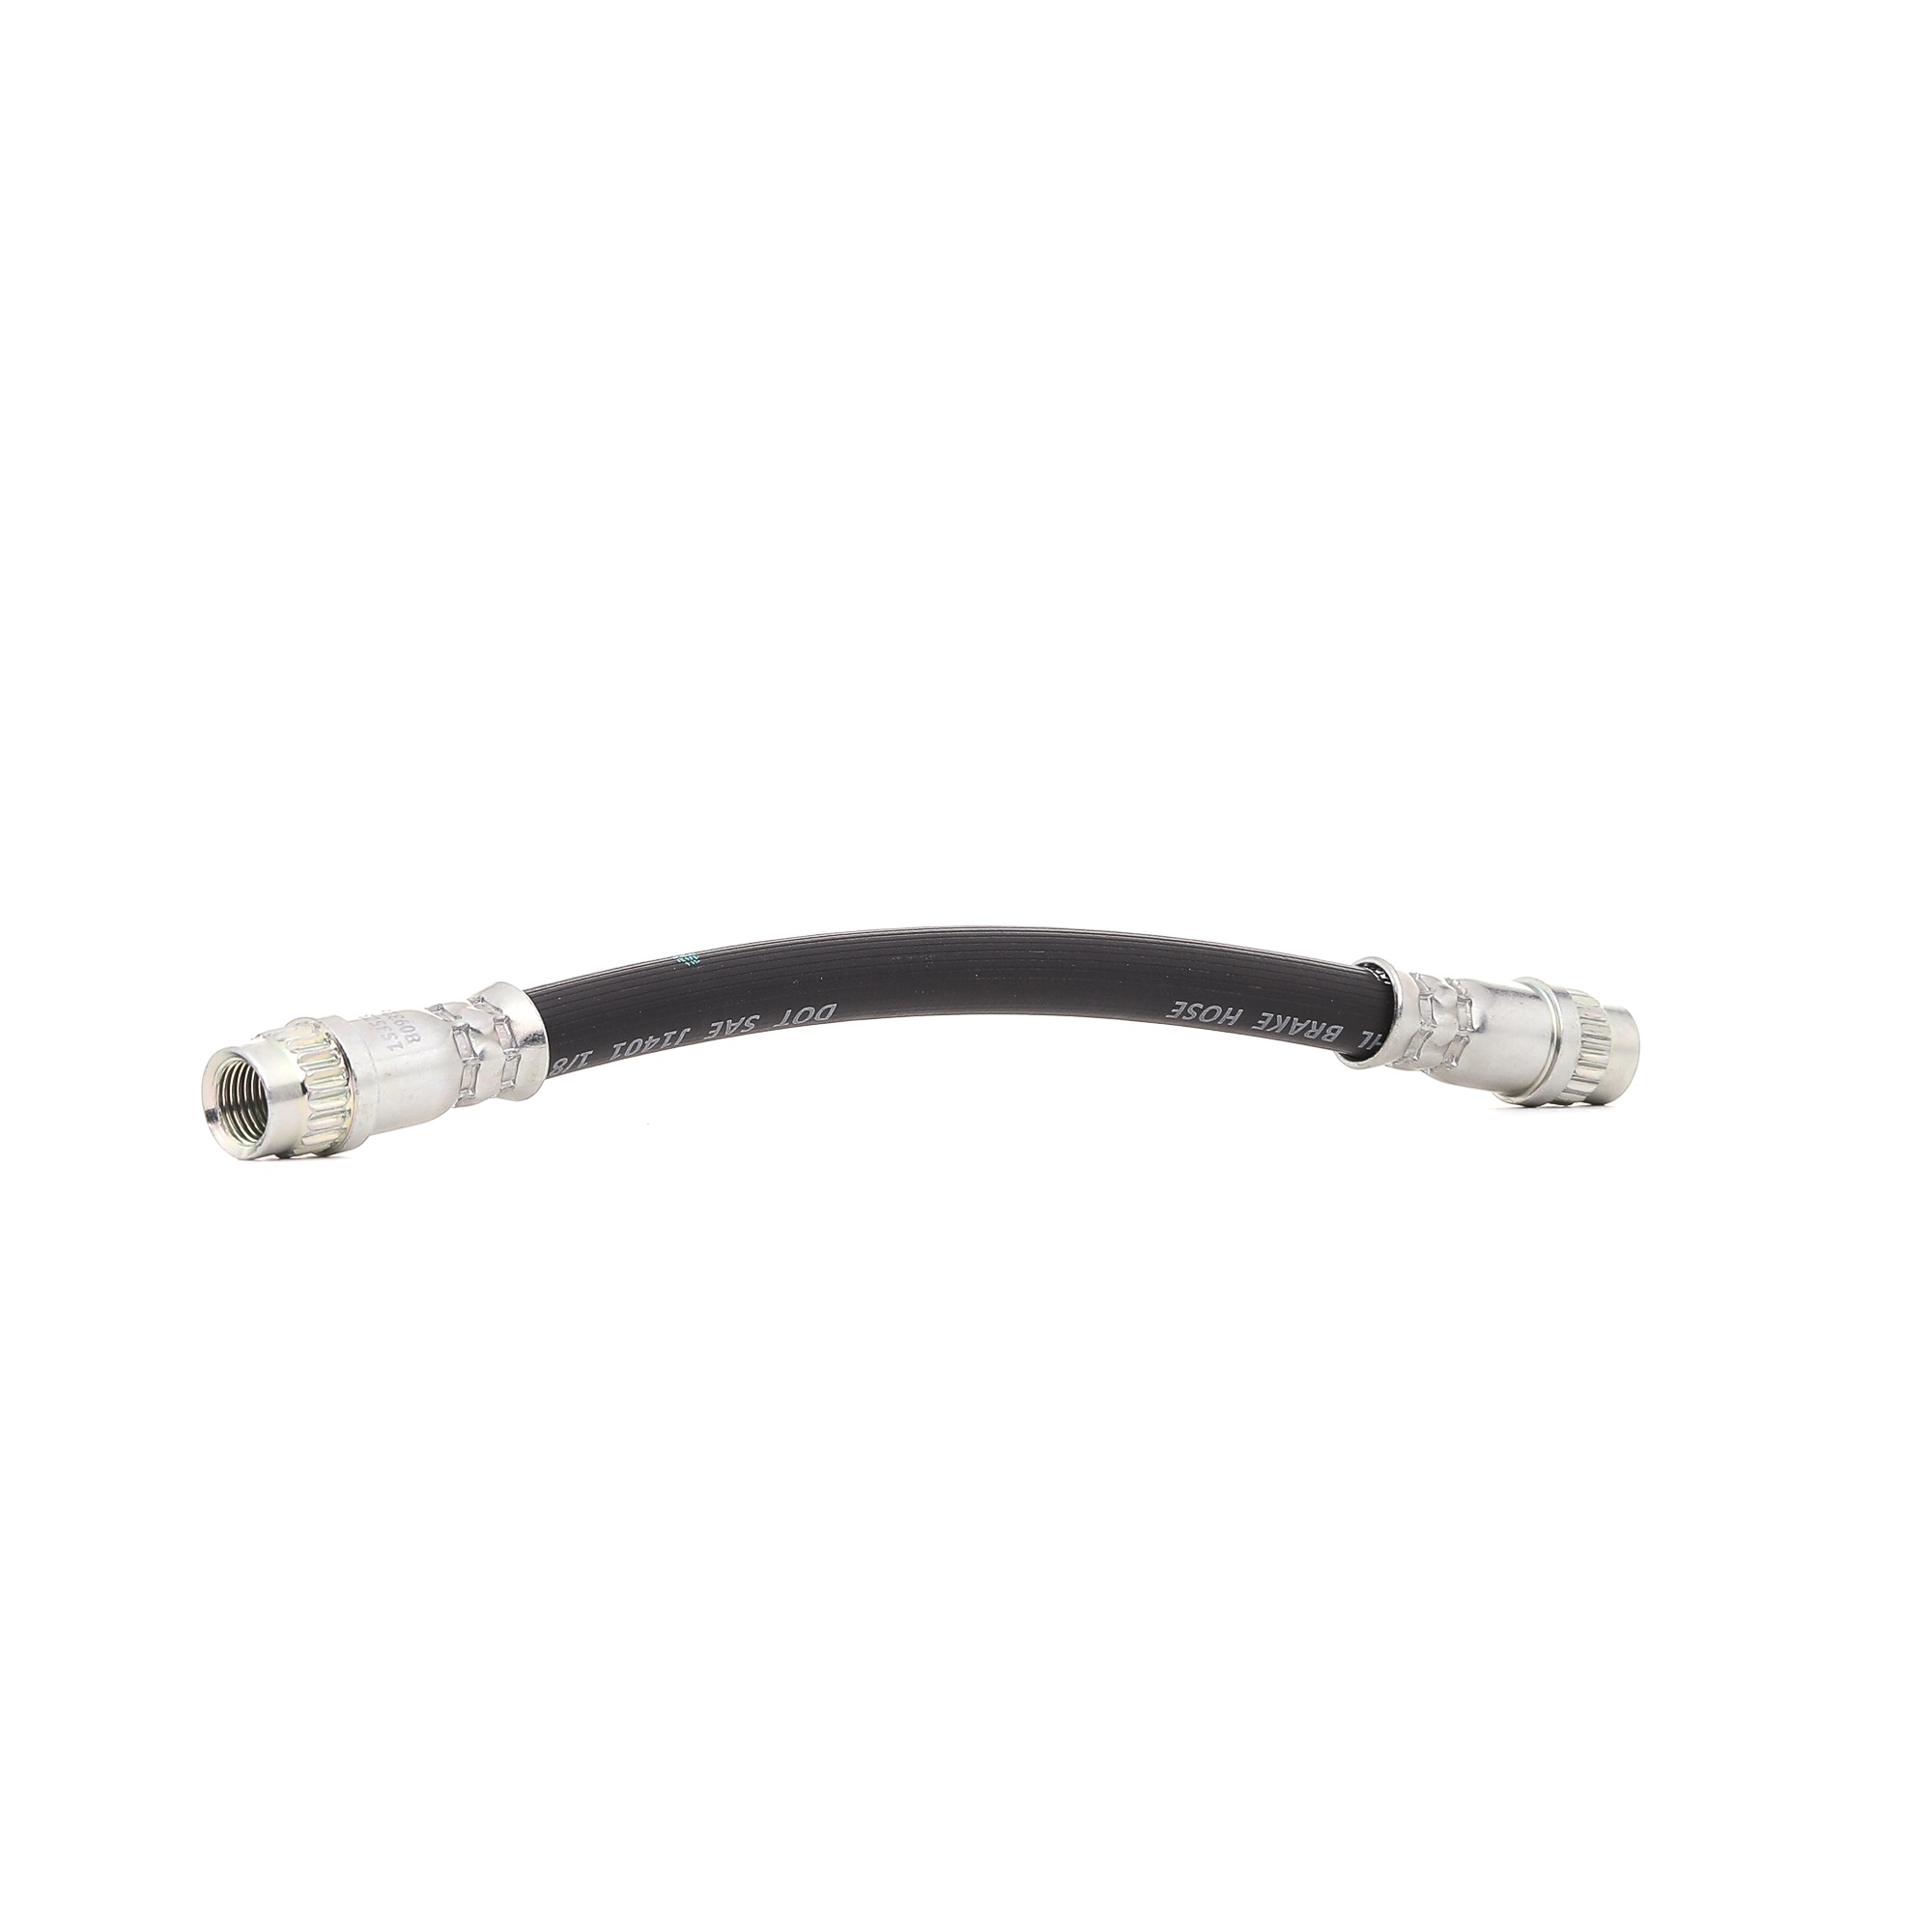 Buy Brake hose RIDEX 83B0195 - Pipes and hoses parts PEUGEOT 405 online